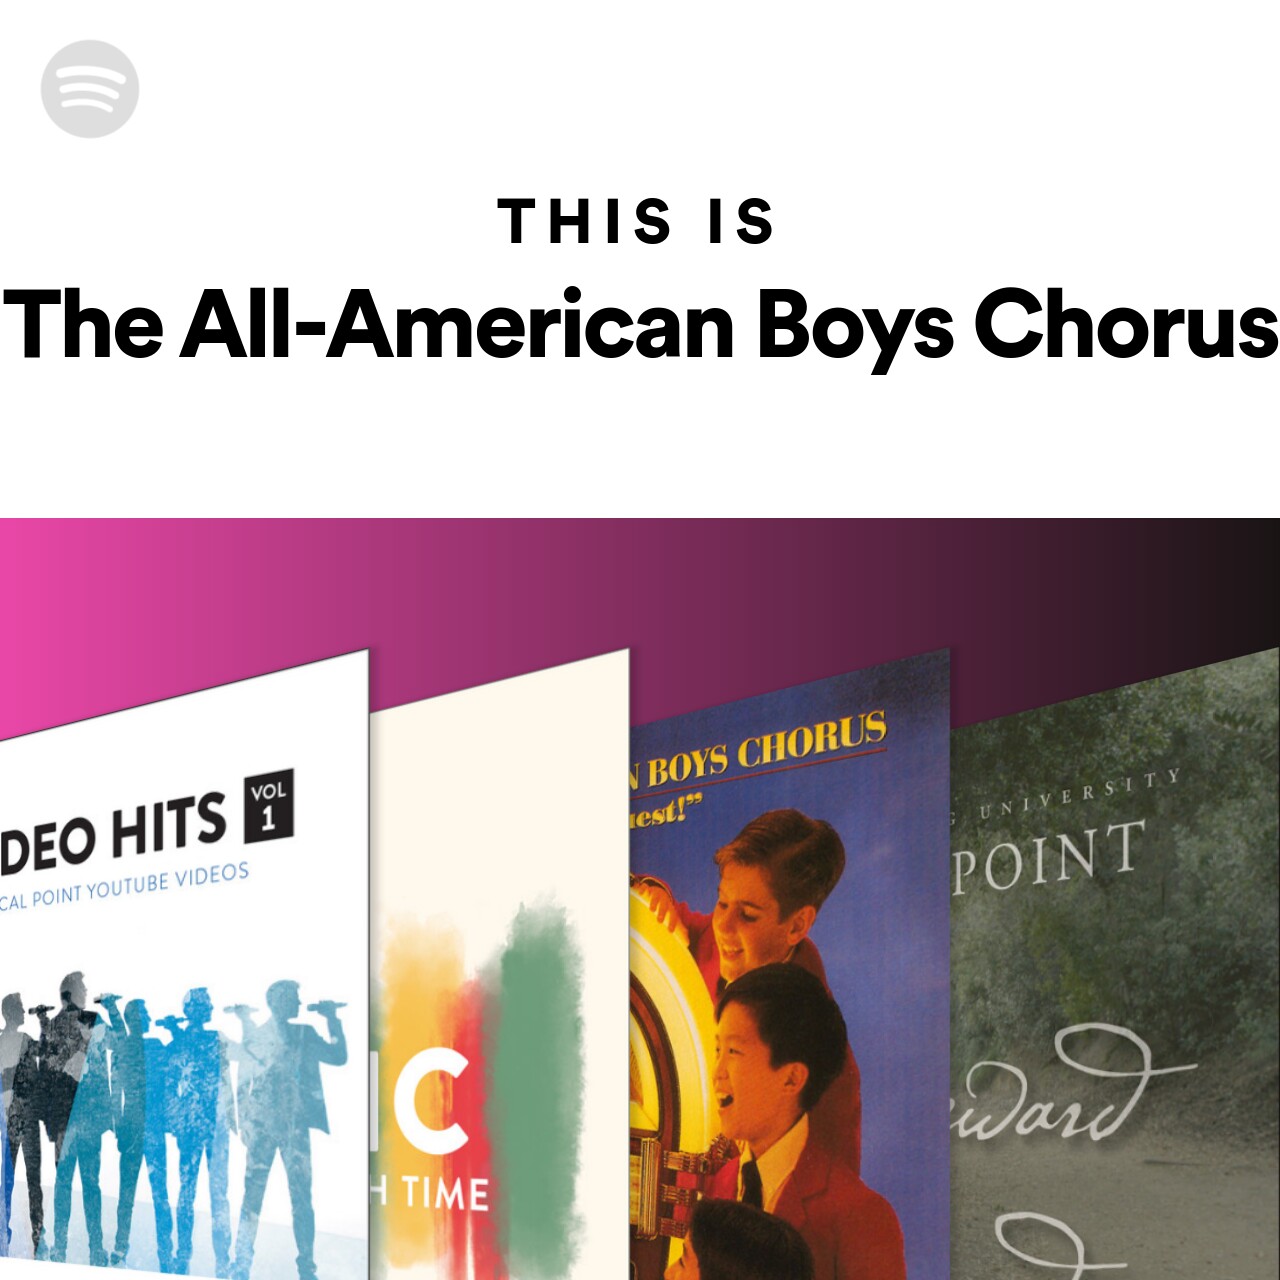 This Is The All-American Boys Chorus